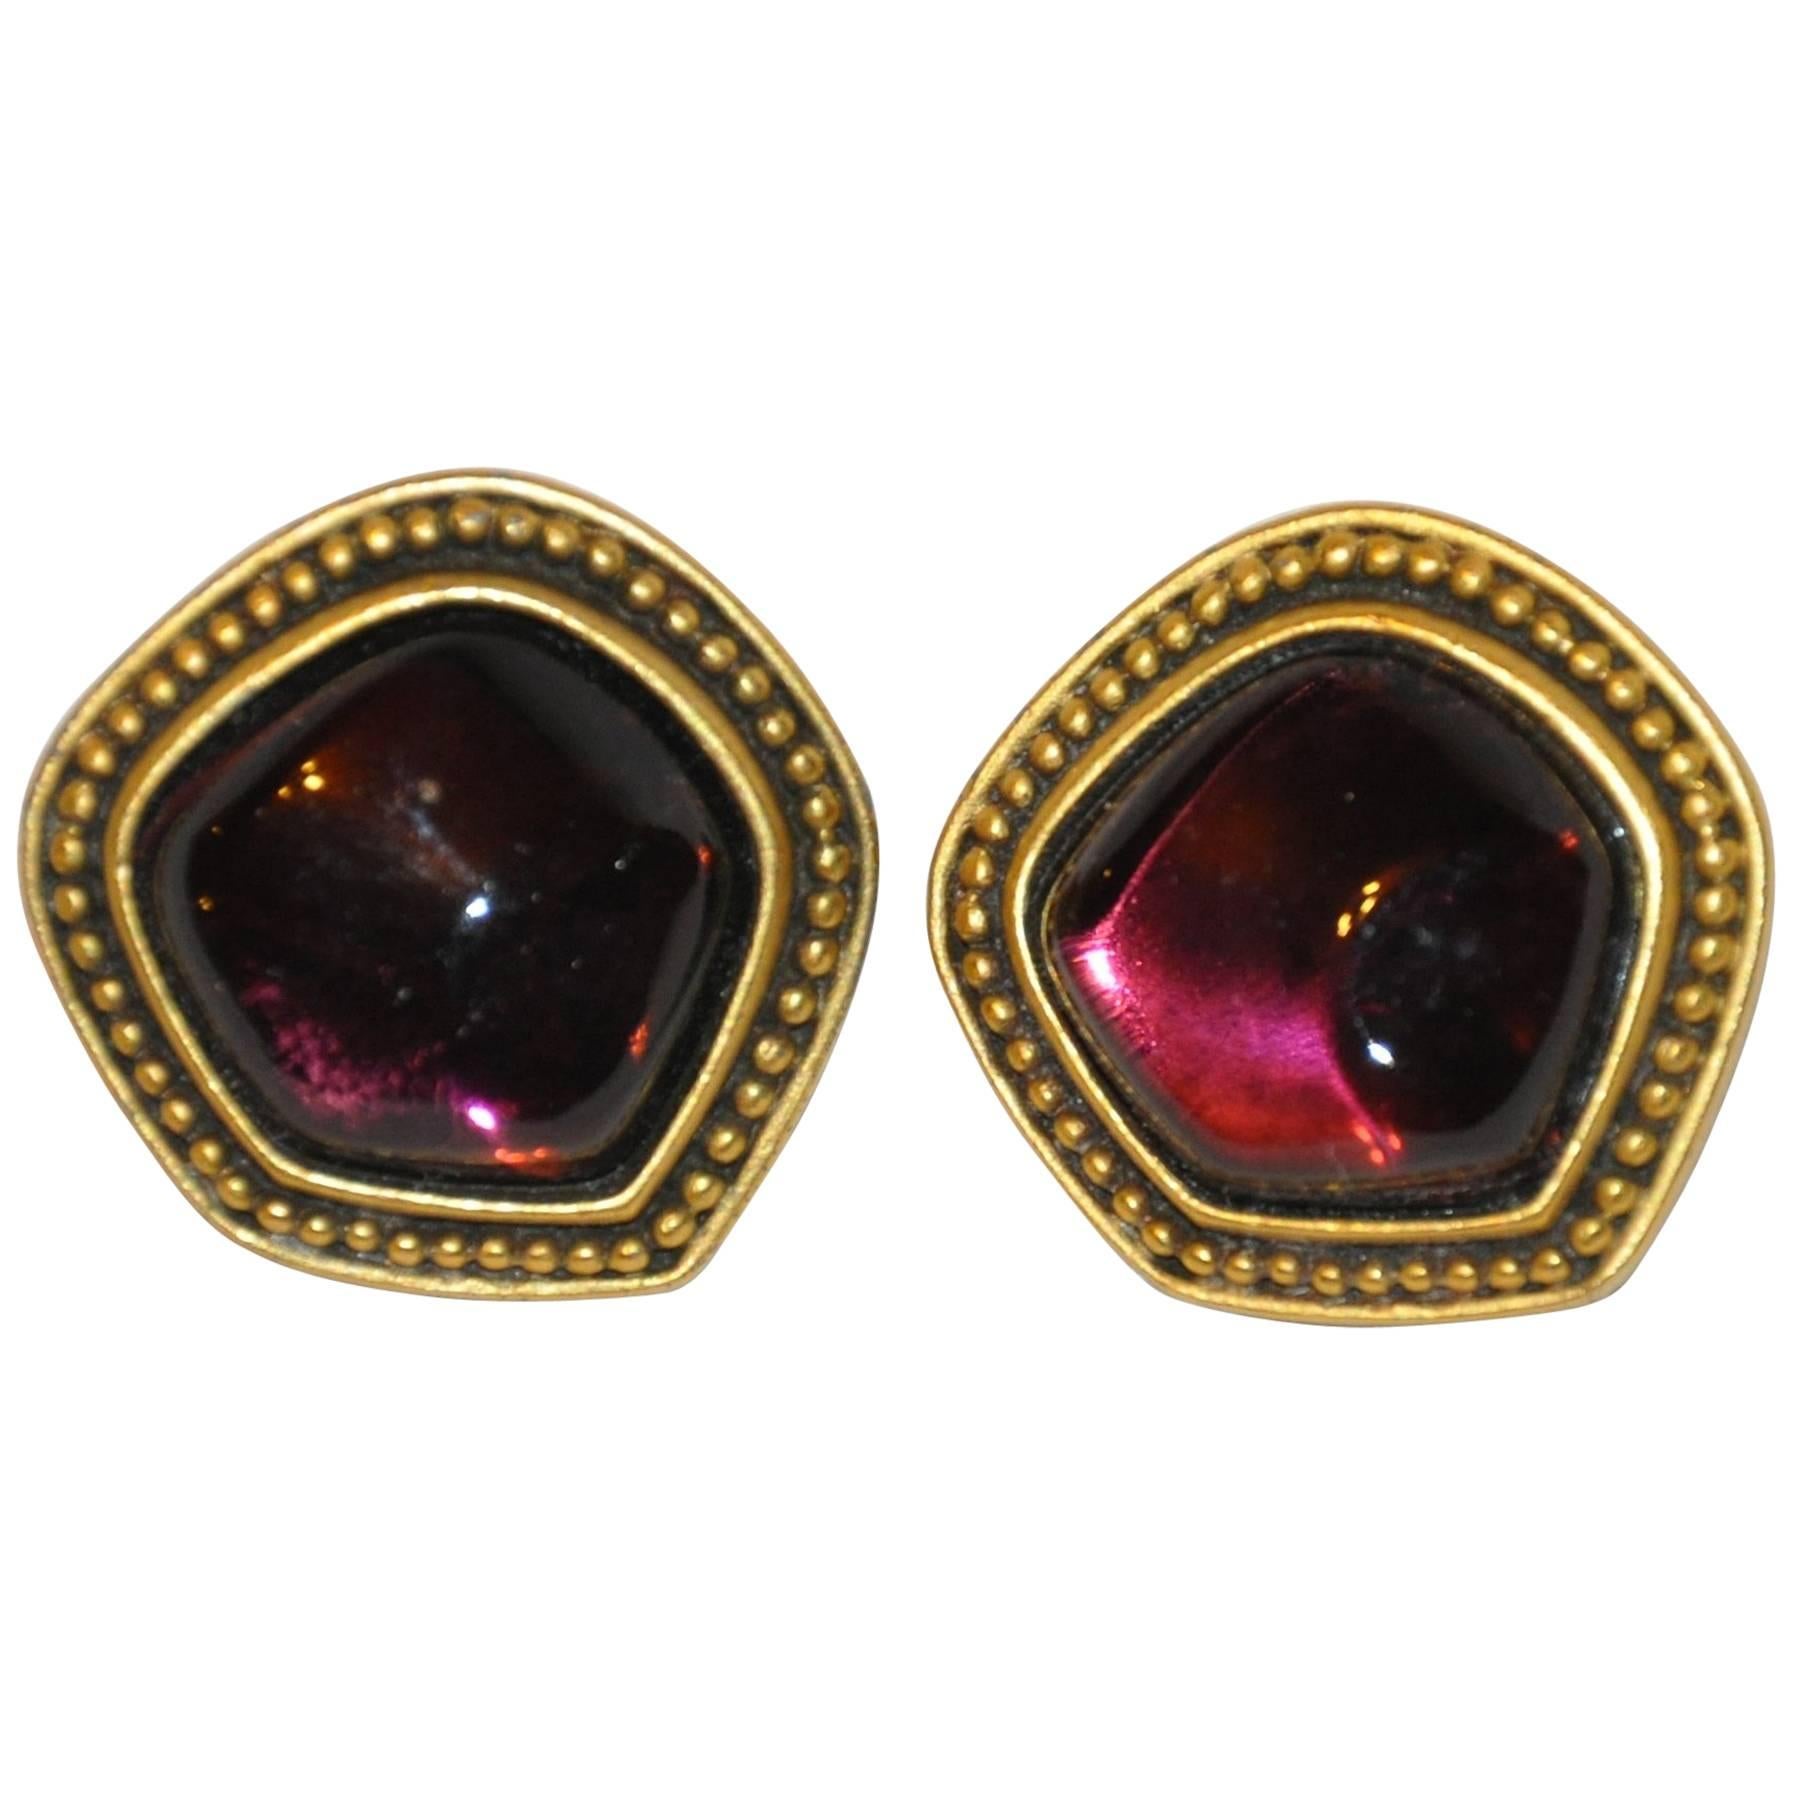 Yves Saint Laurent Plum Pour Glass with Gold Hardware Earrings